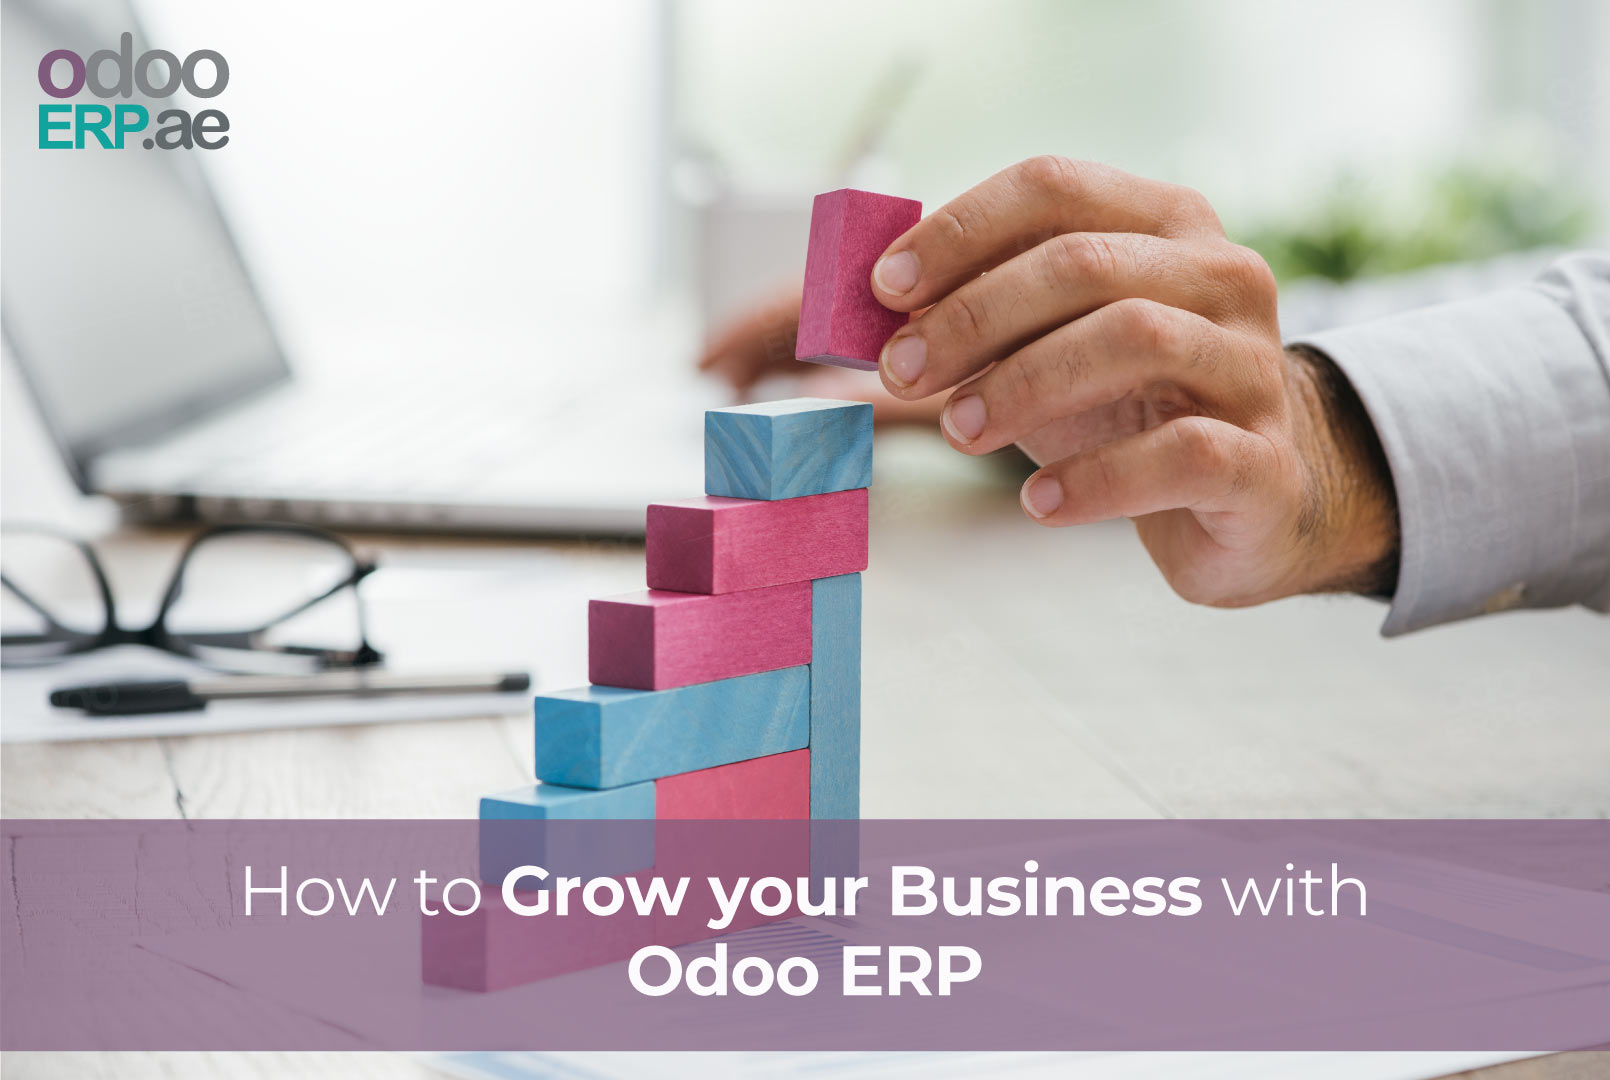 How To Use Odoo ERP software to Grow Your Business in Dubai